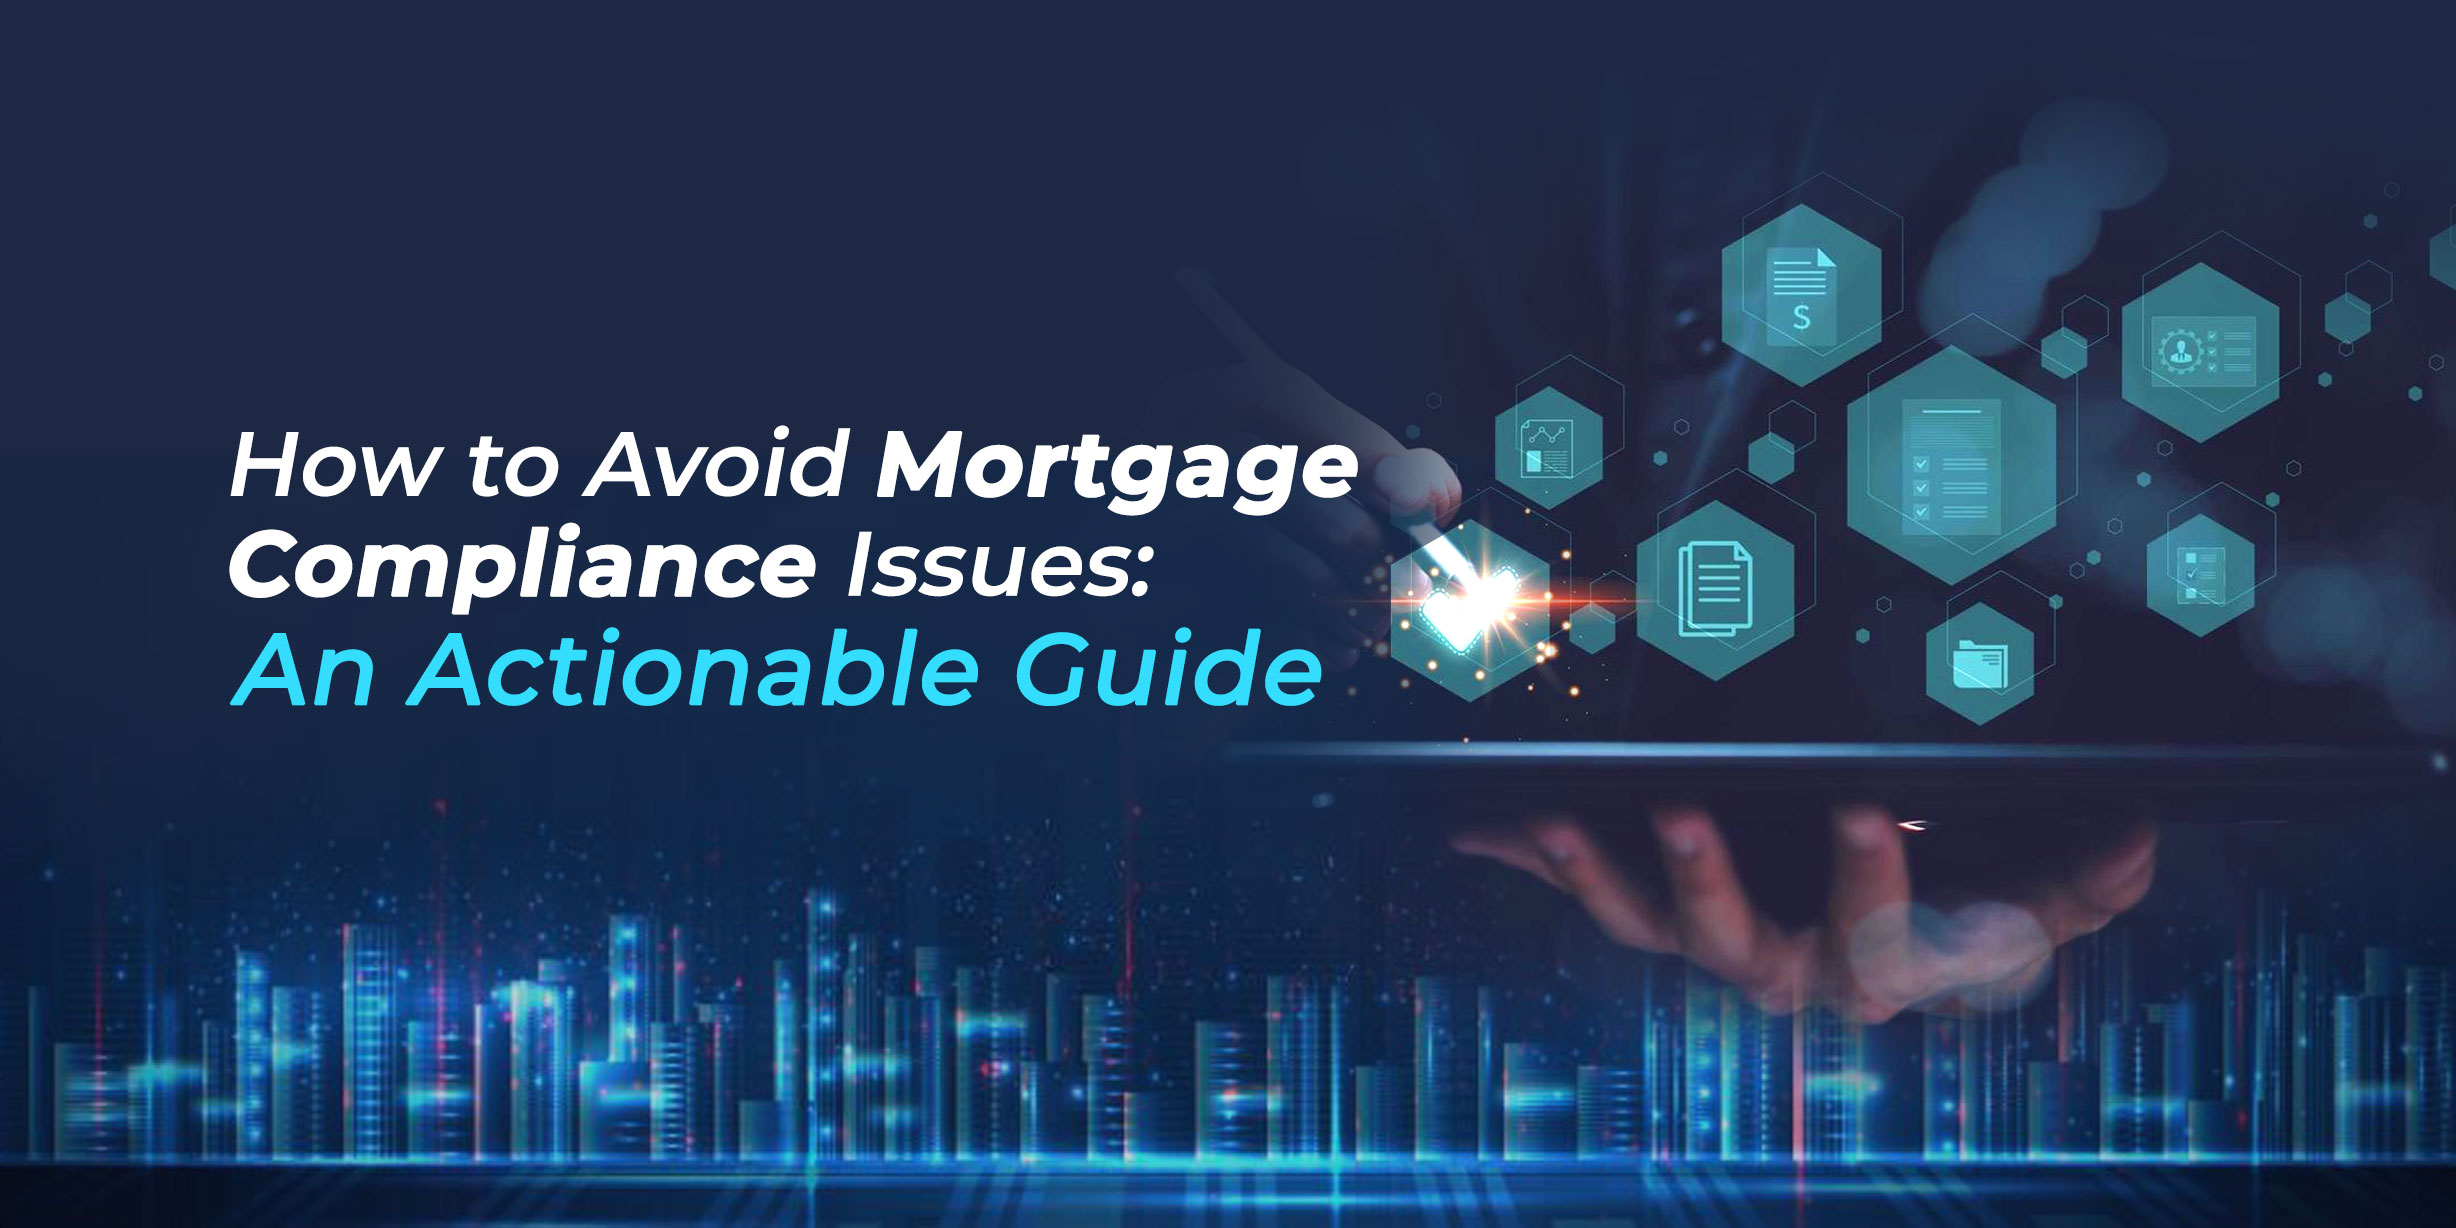 How to Avoid Mortgage Compliance Issues: An Actionable Guide